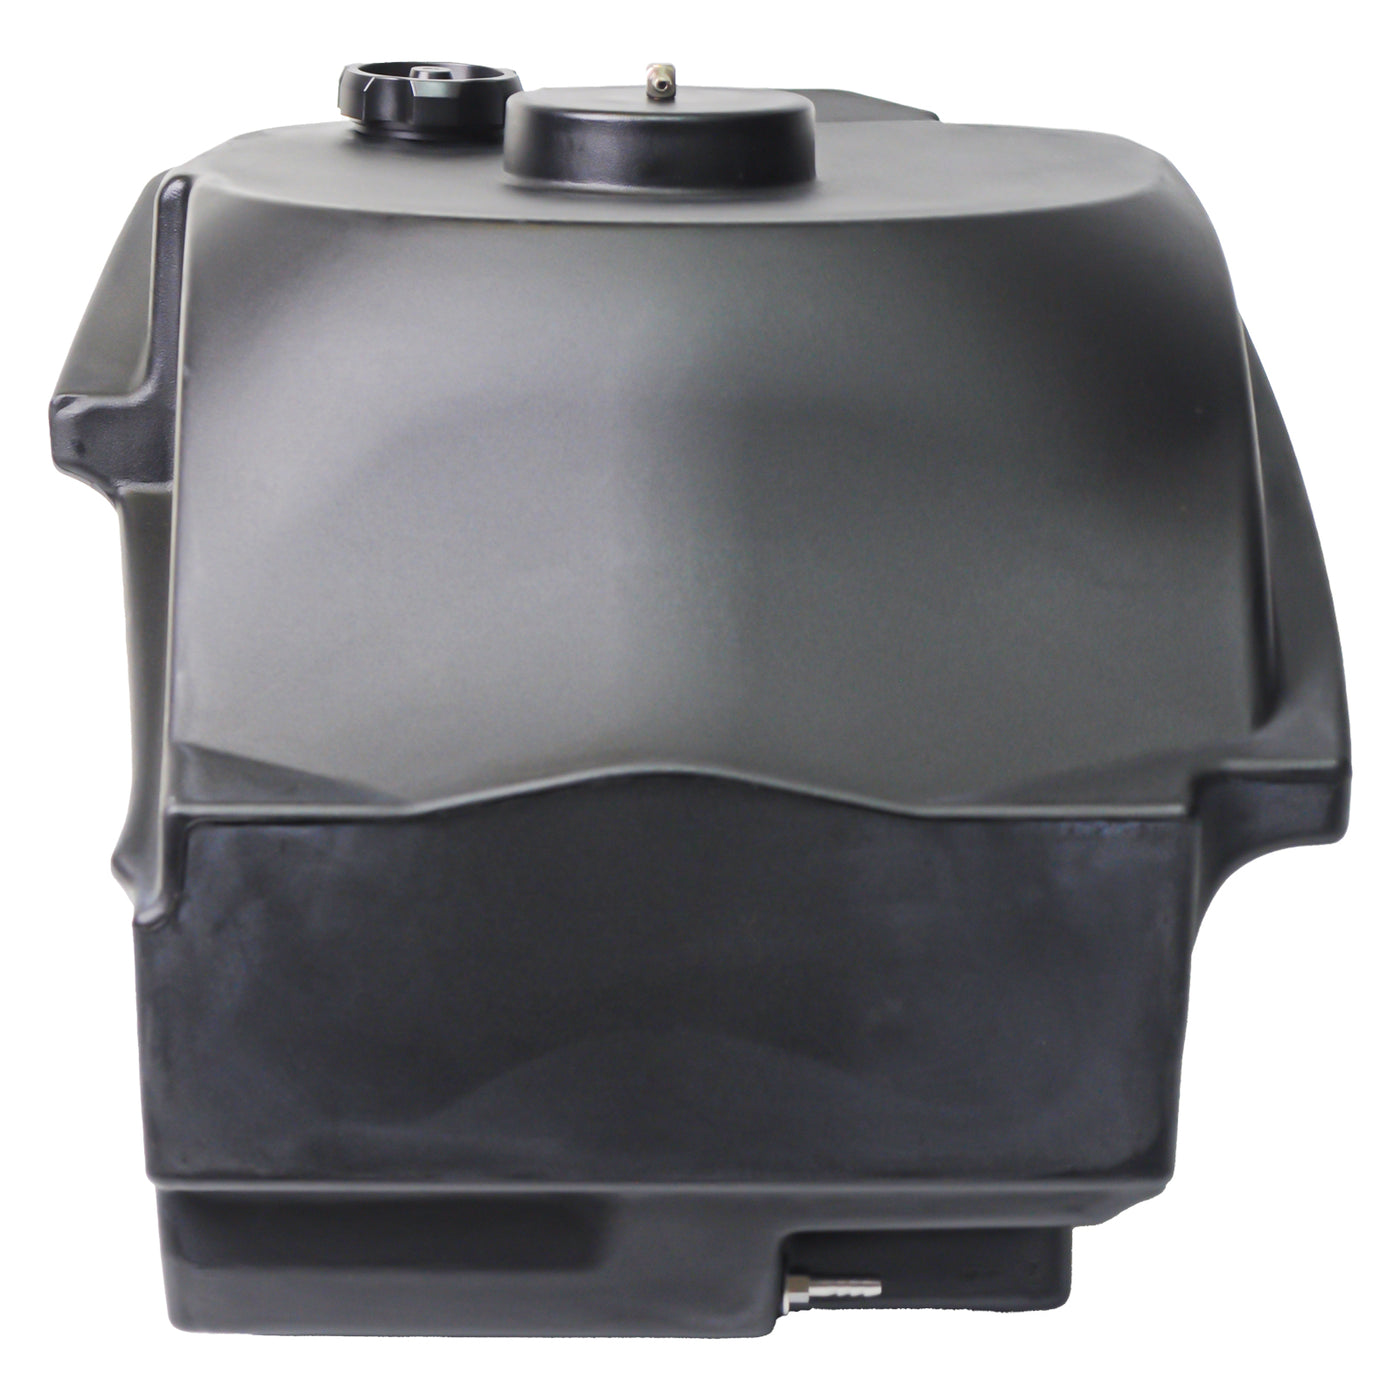 KYMCO Motorcycle Auxiliary Fuel Tank Made of PE Material for CT250 (16.93x12.60x11.02 inches, 17L)